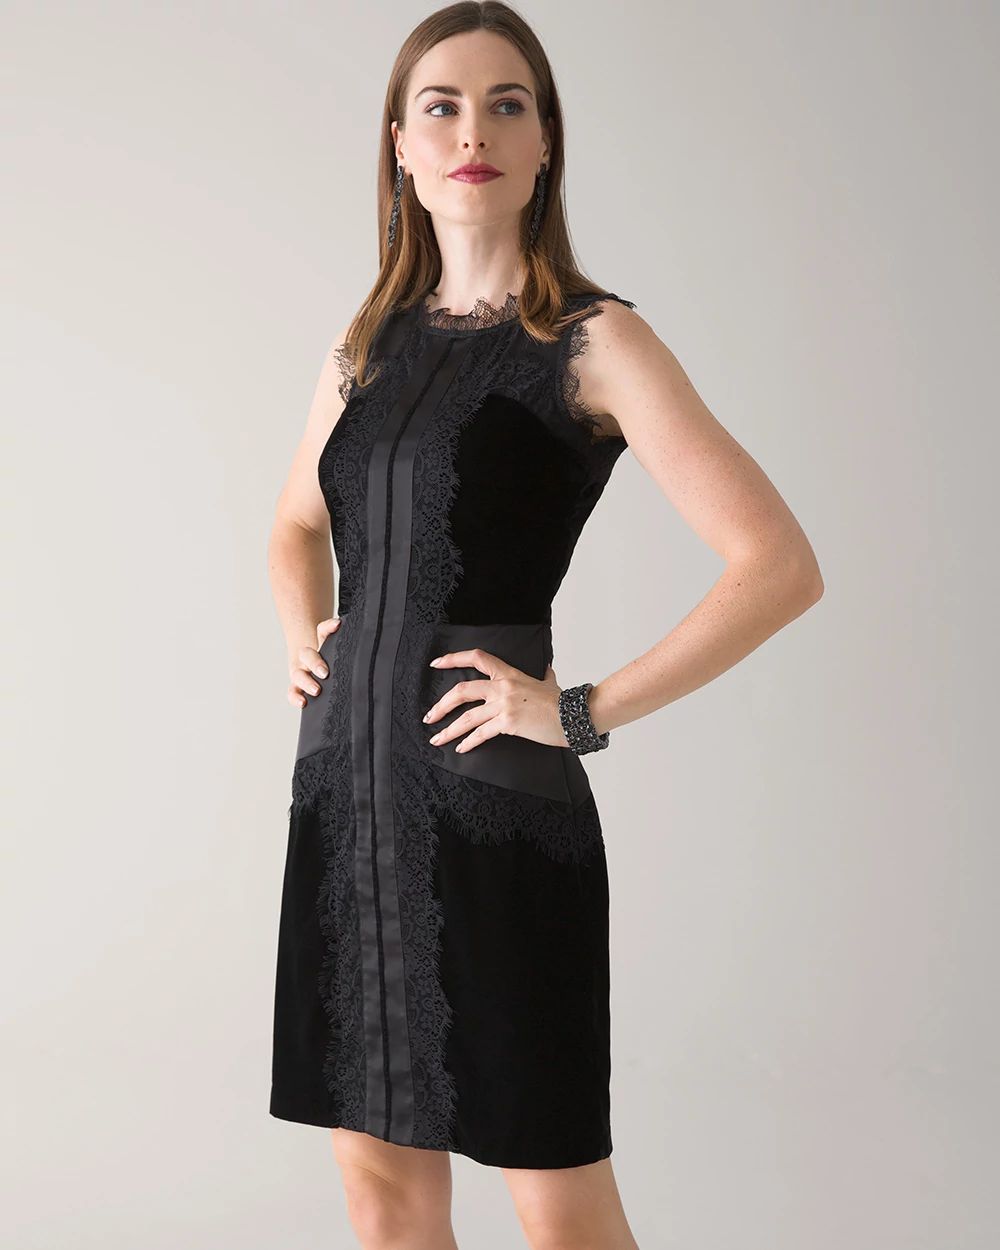 Velvet Lace Sleeveless Dress click to view larger image.